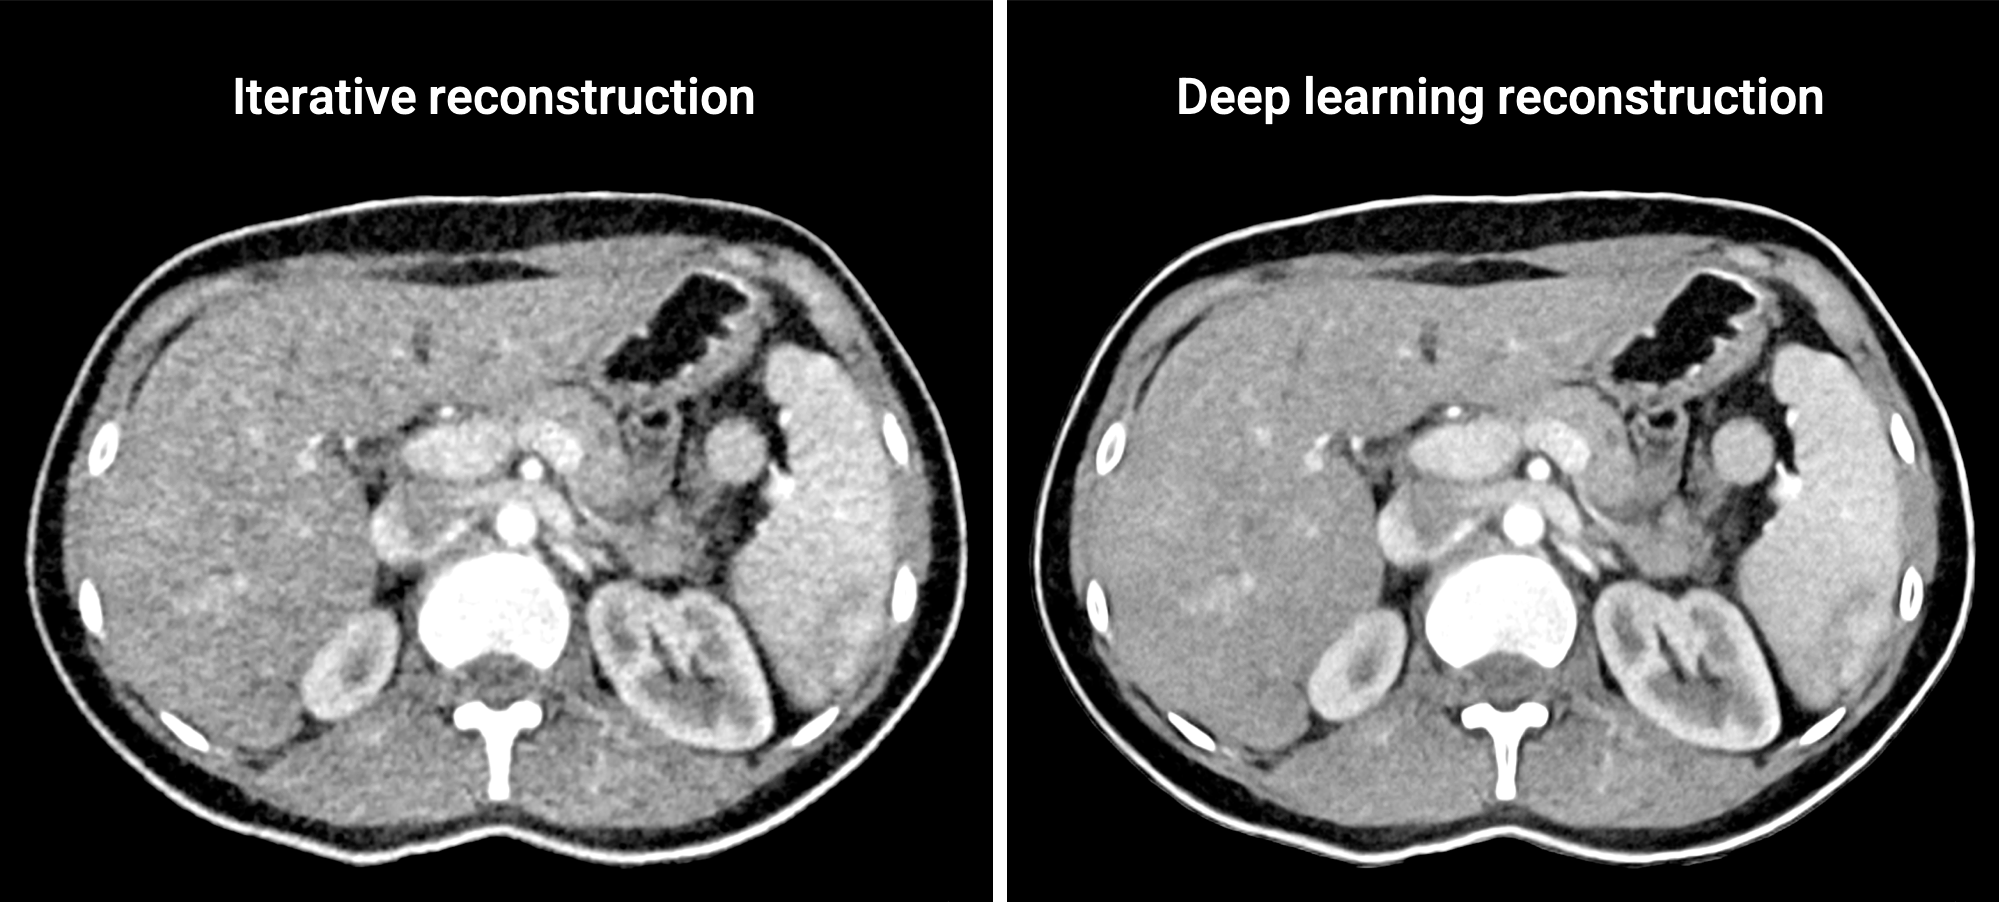 Deep learning reconstruction CT